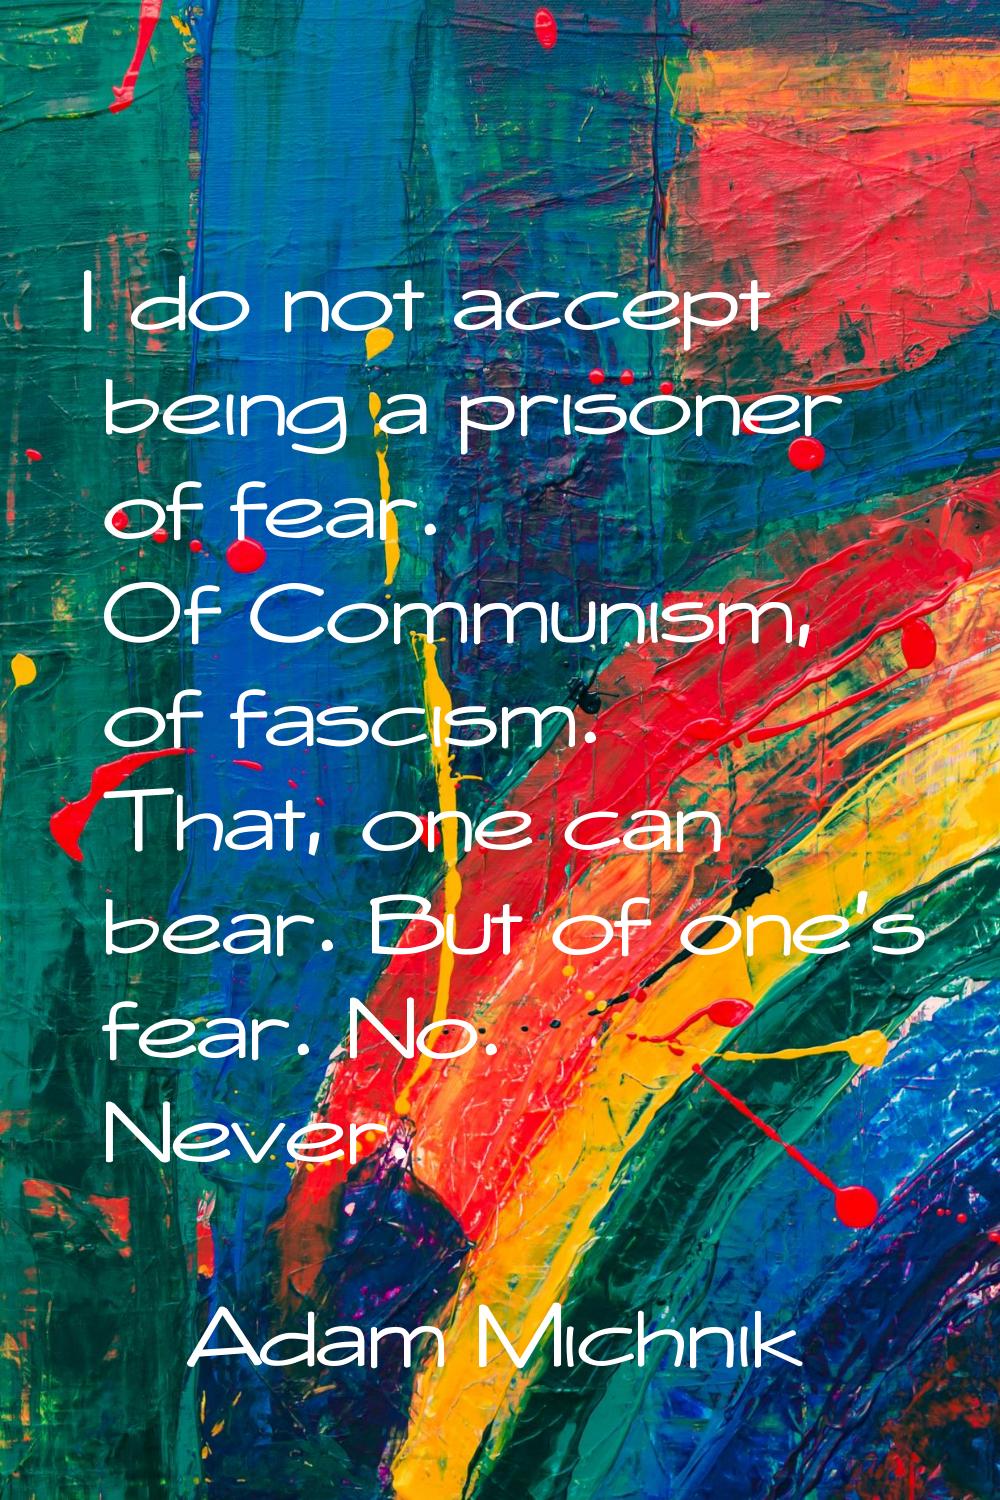 I do not accept being a prisoner of fear. Of Communism, of fascism. That, one can bear. But of one'